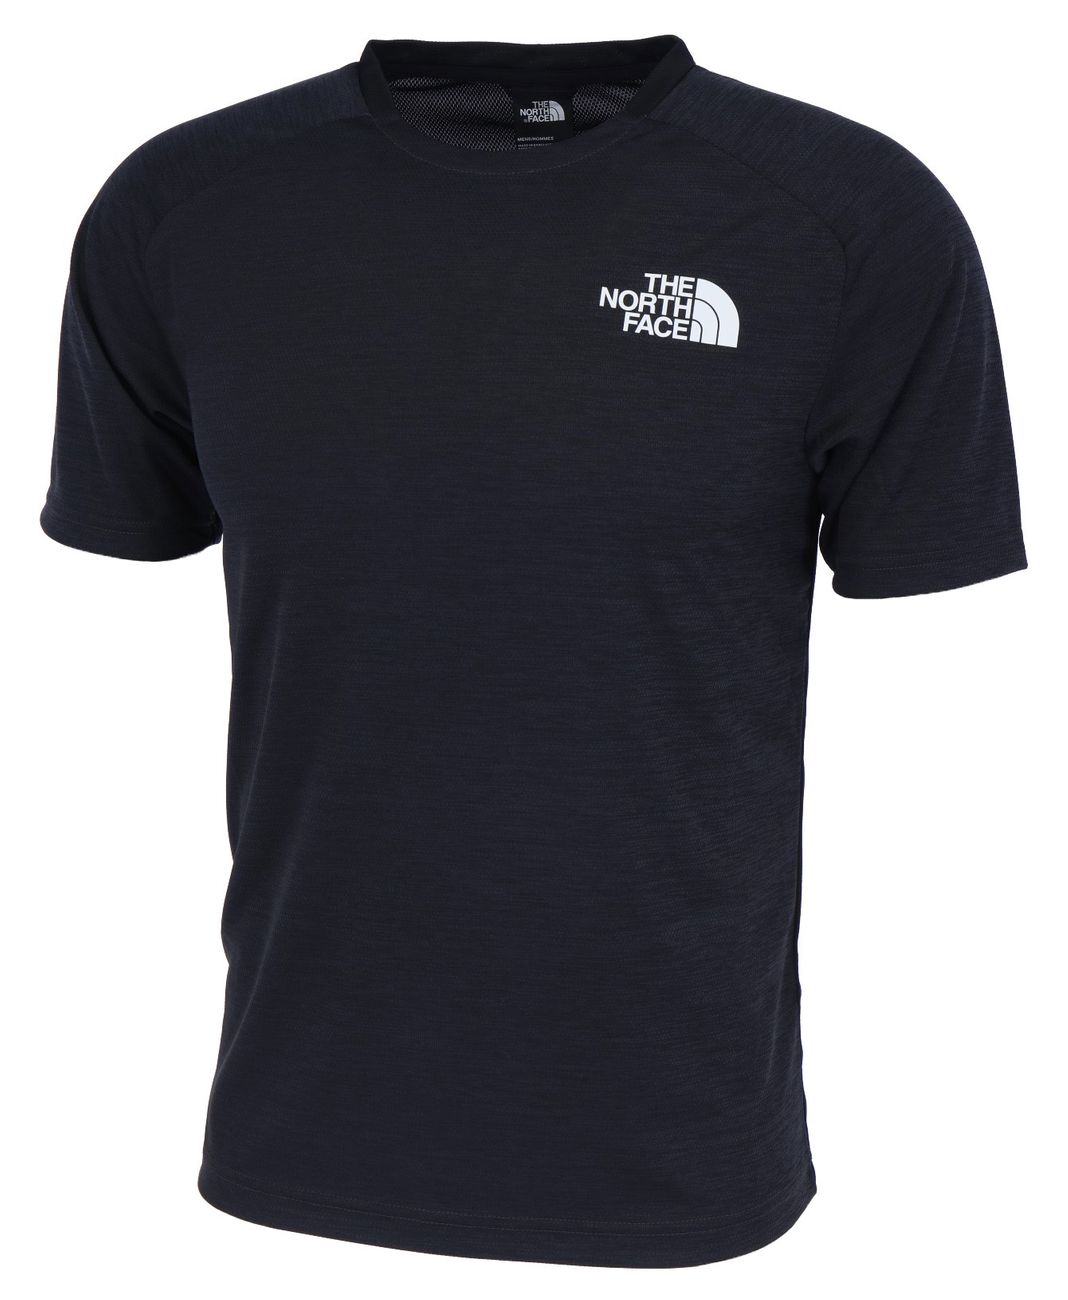 THE NORTH FACE M MOUNTAIN ATHLETICS TEE Herren T-Shirt - The North Face - SAGATOO - 193394988082